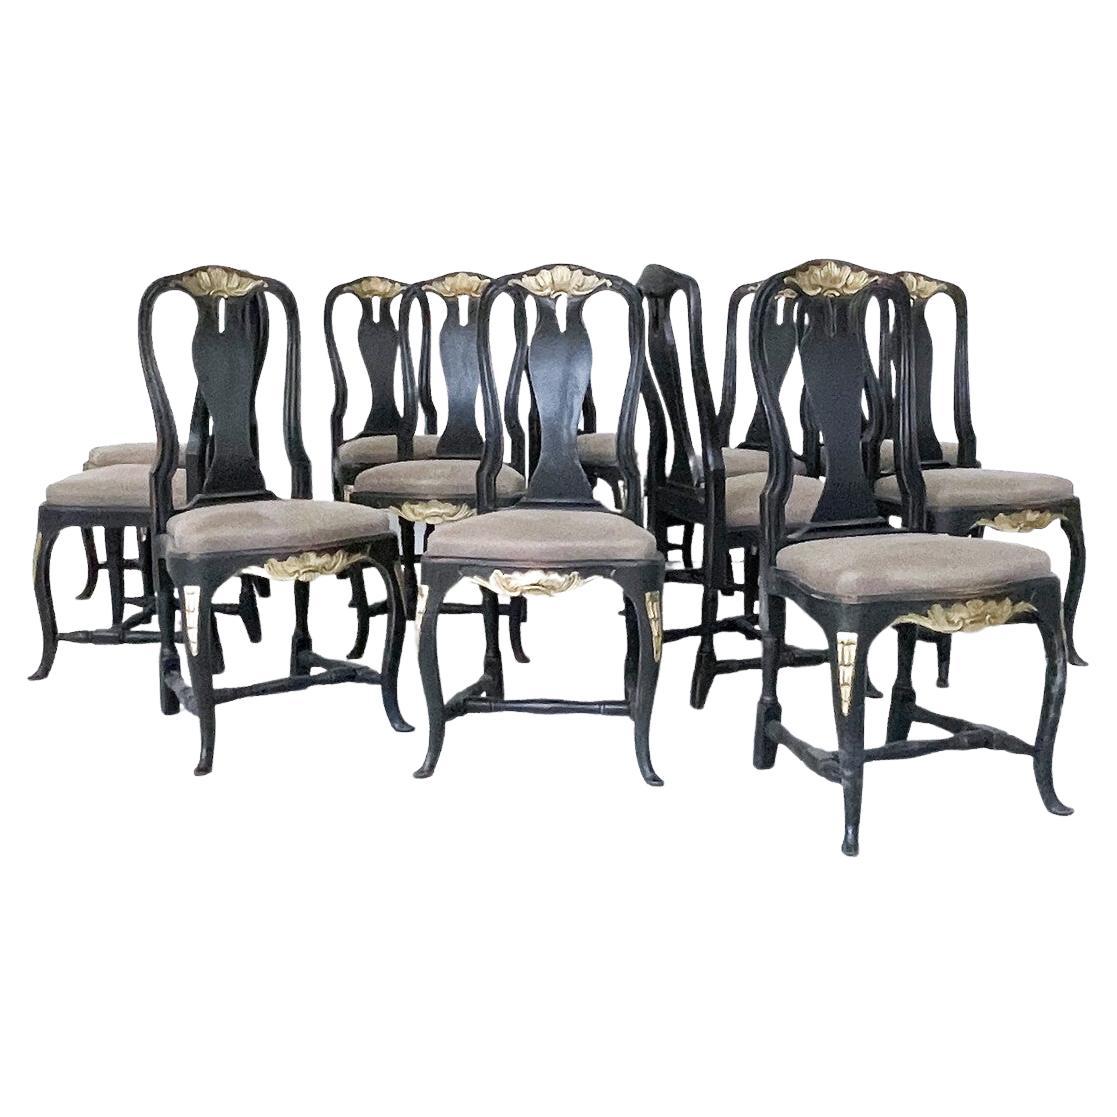 Set of 12 Swedish Chairs, XVIIIe Style, Black Wood and Fabric (sold per piece) For Sale